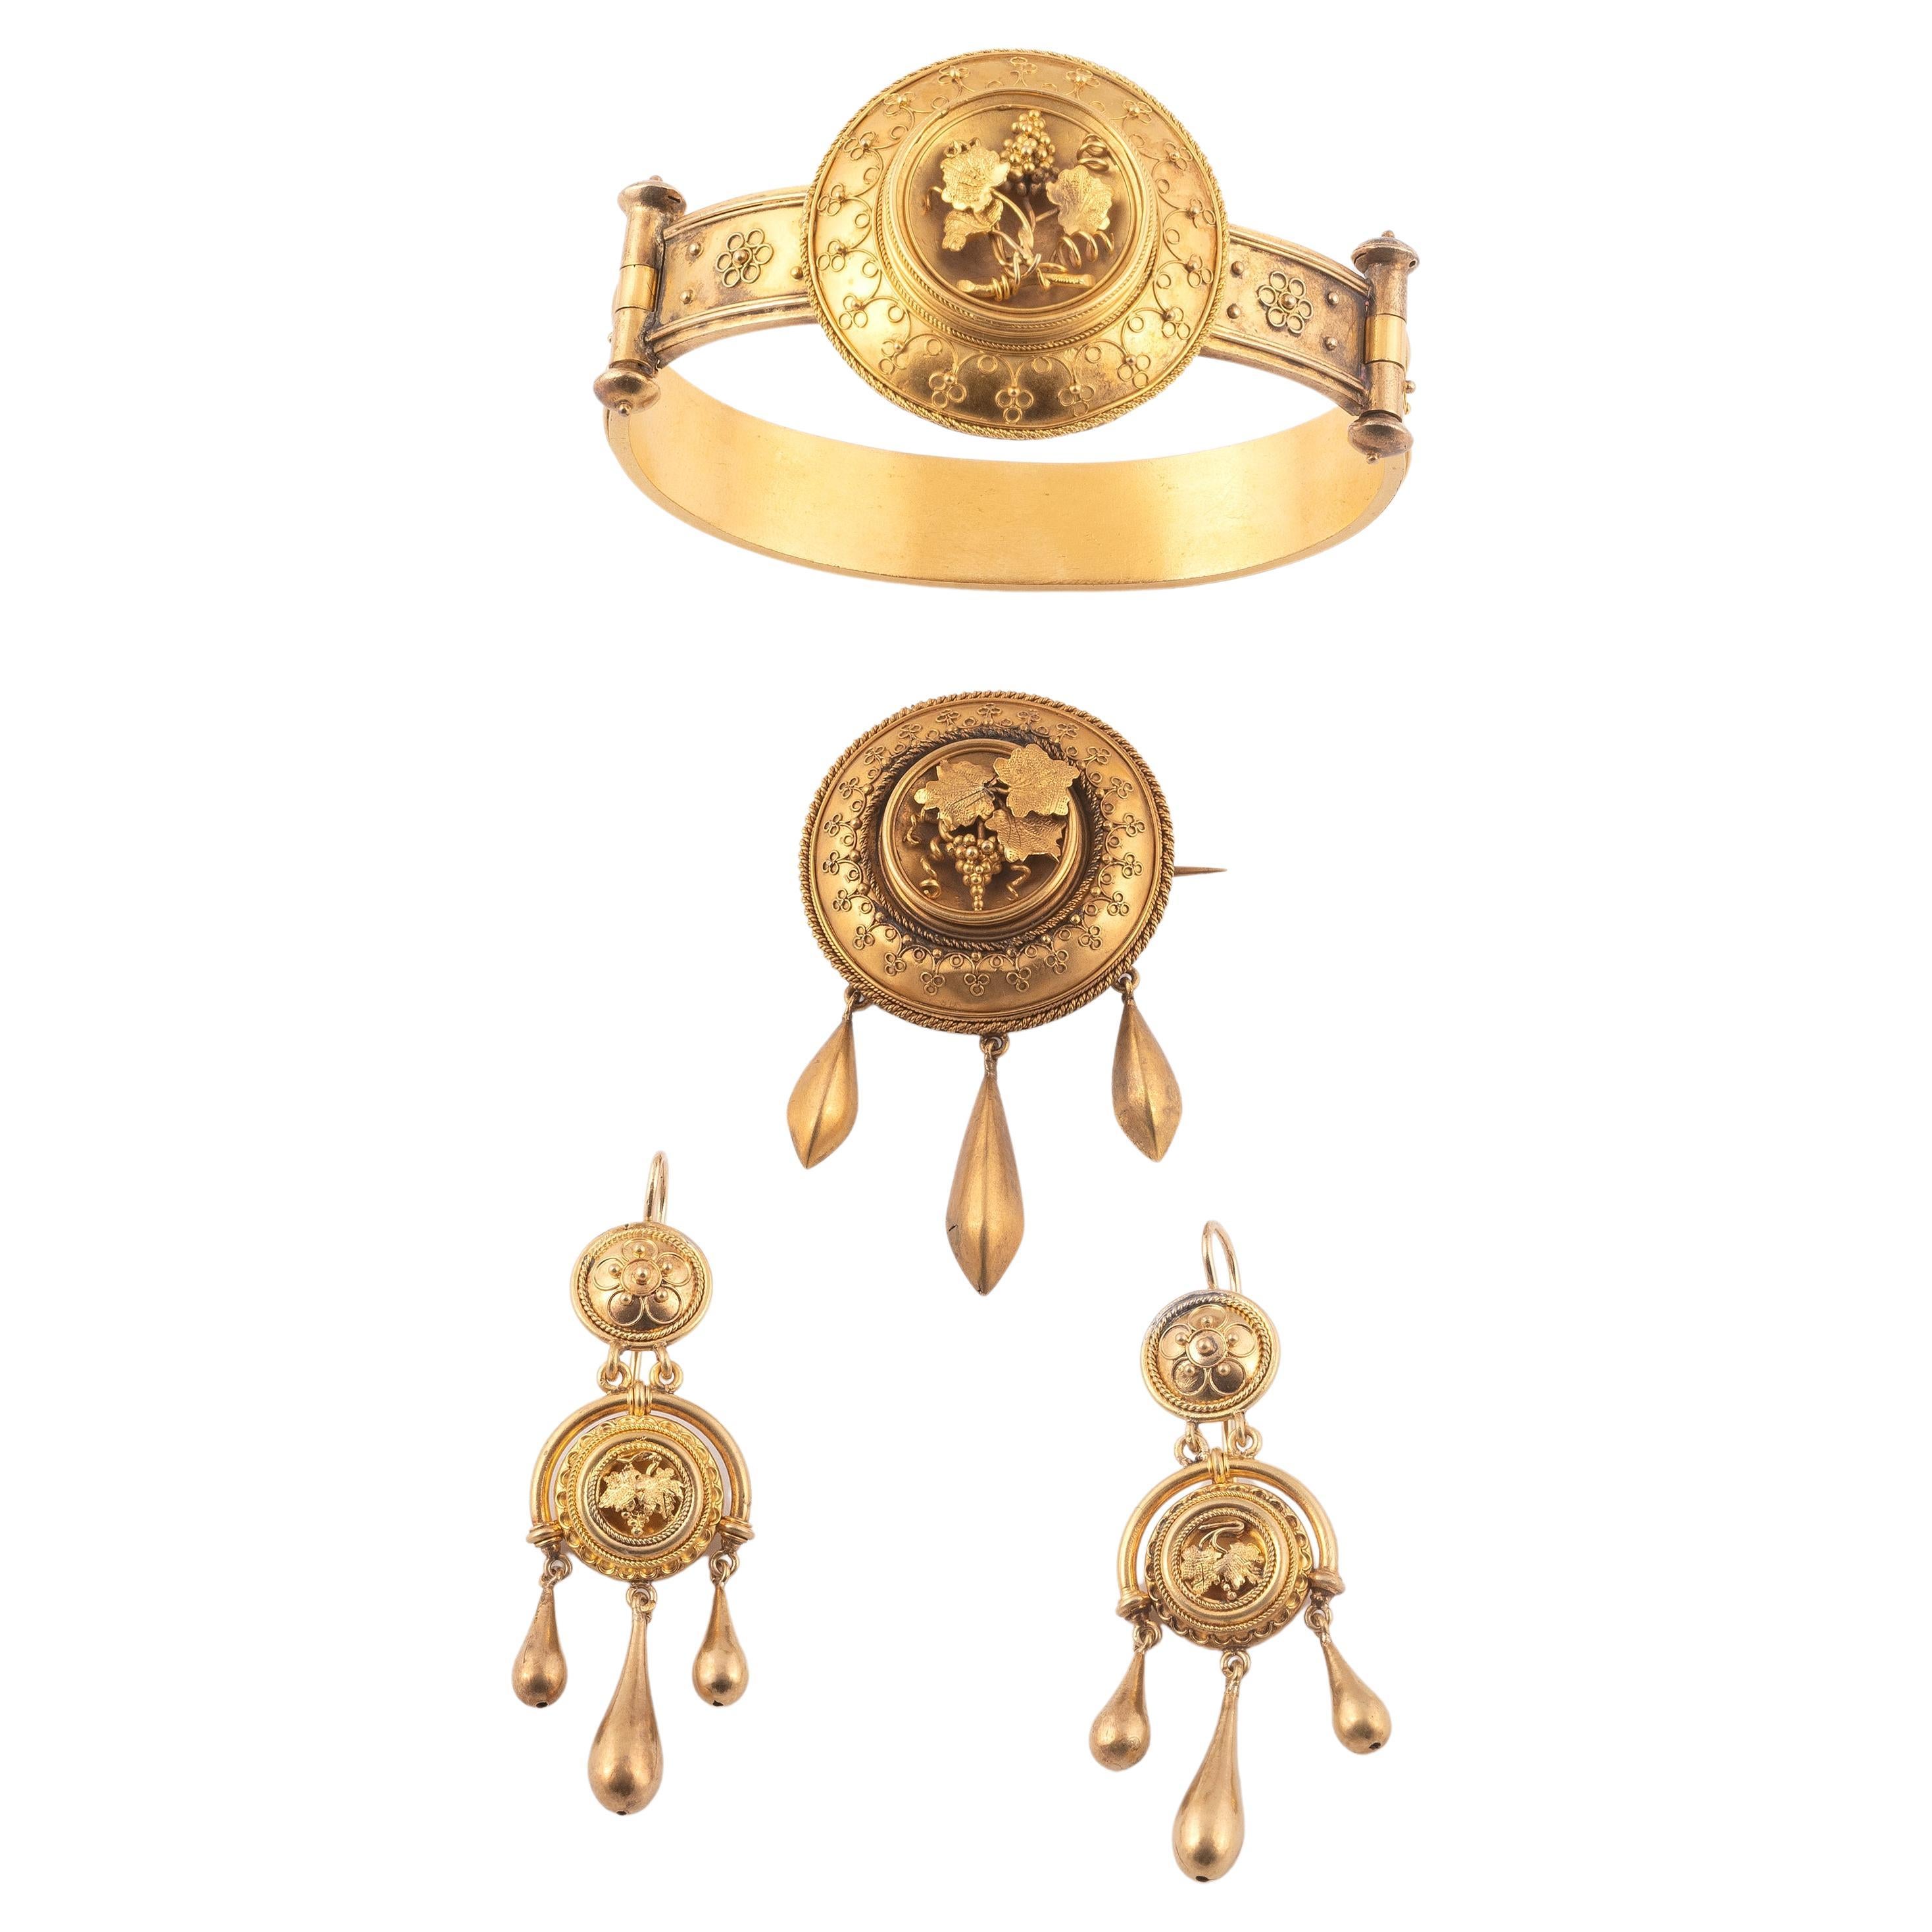 Gold Archaeological Revival Parure 19th Century